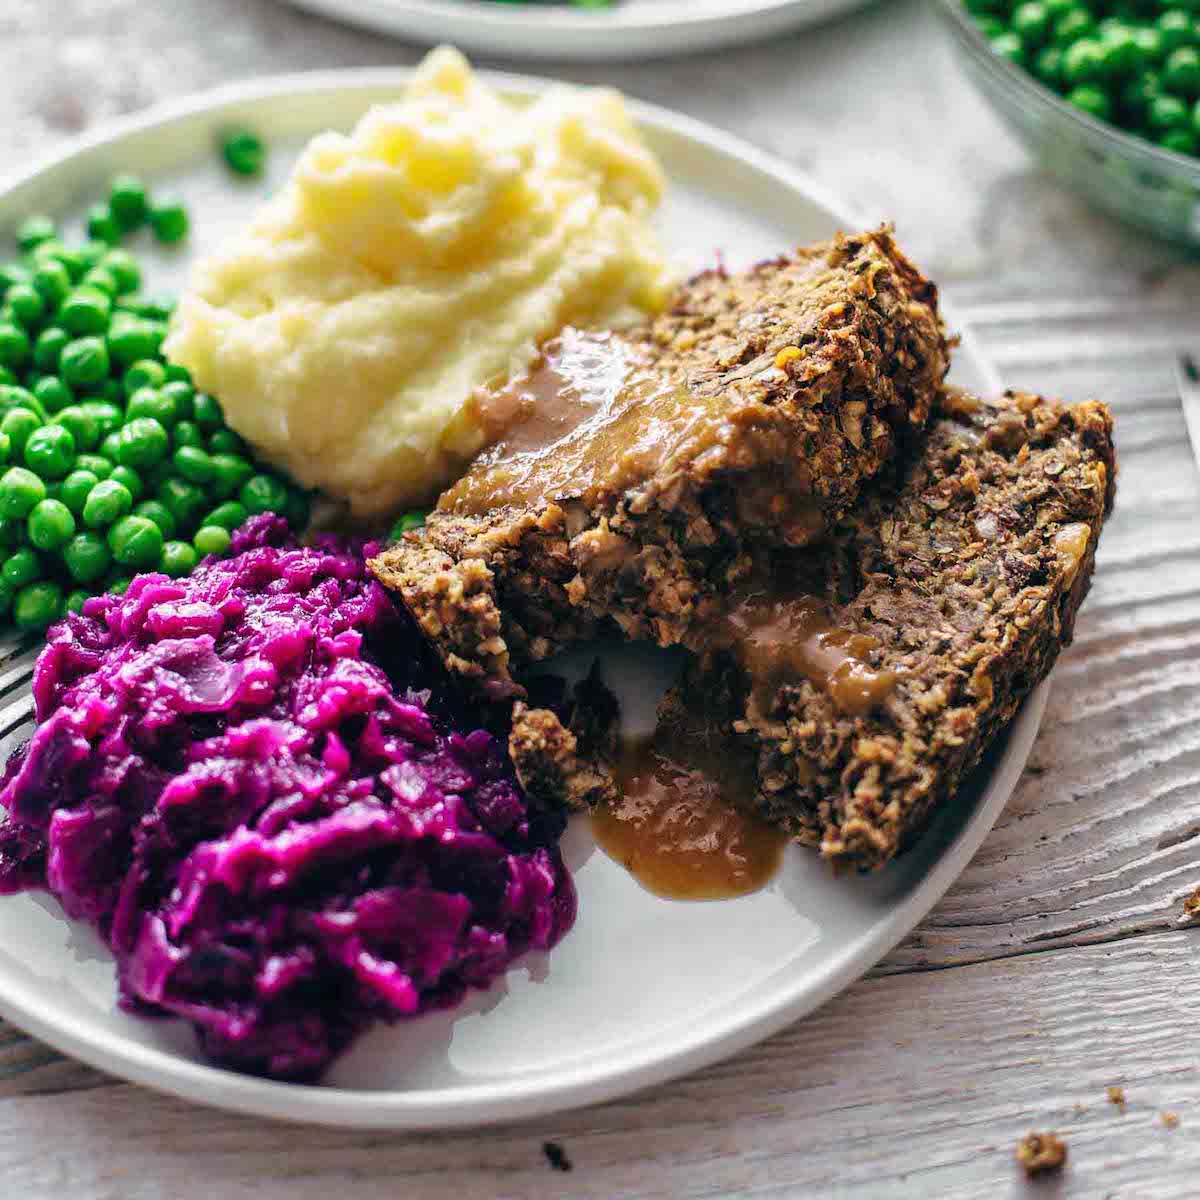 vegan meatloaf, mashed potato, red cabbage and peas on a plate